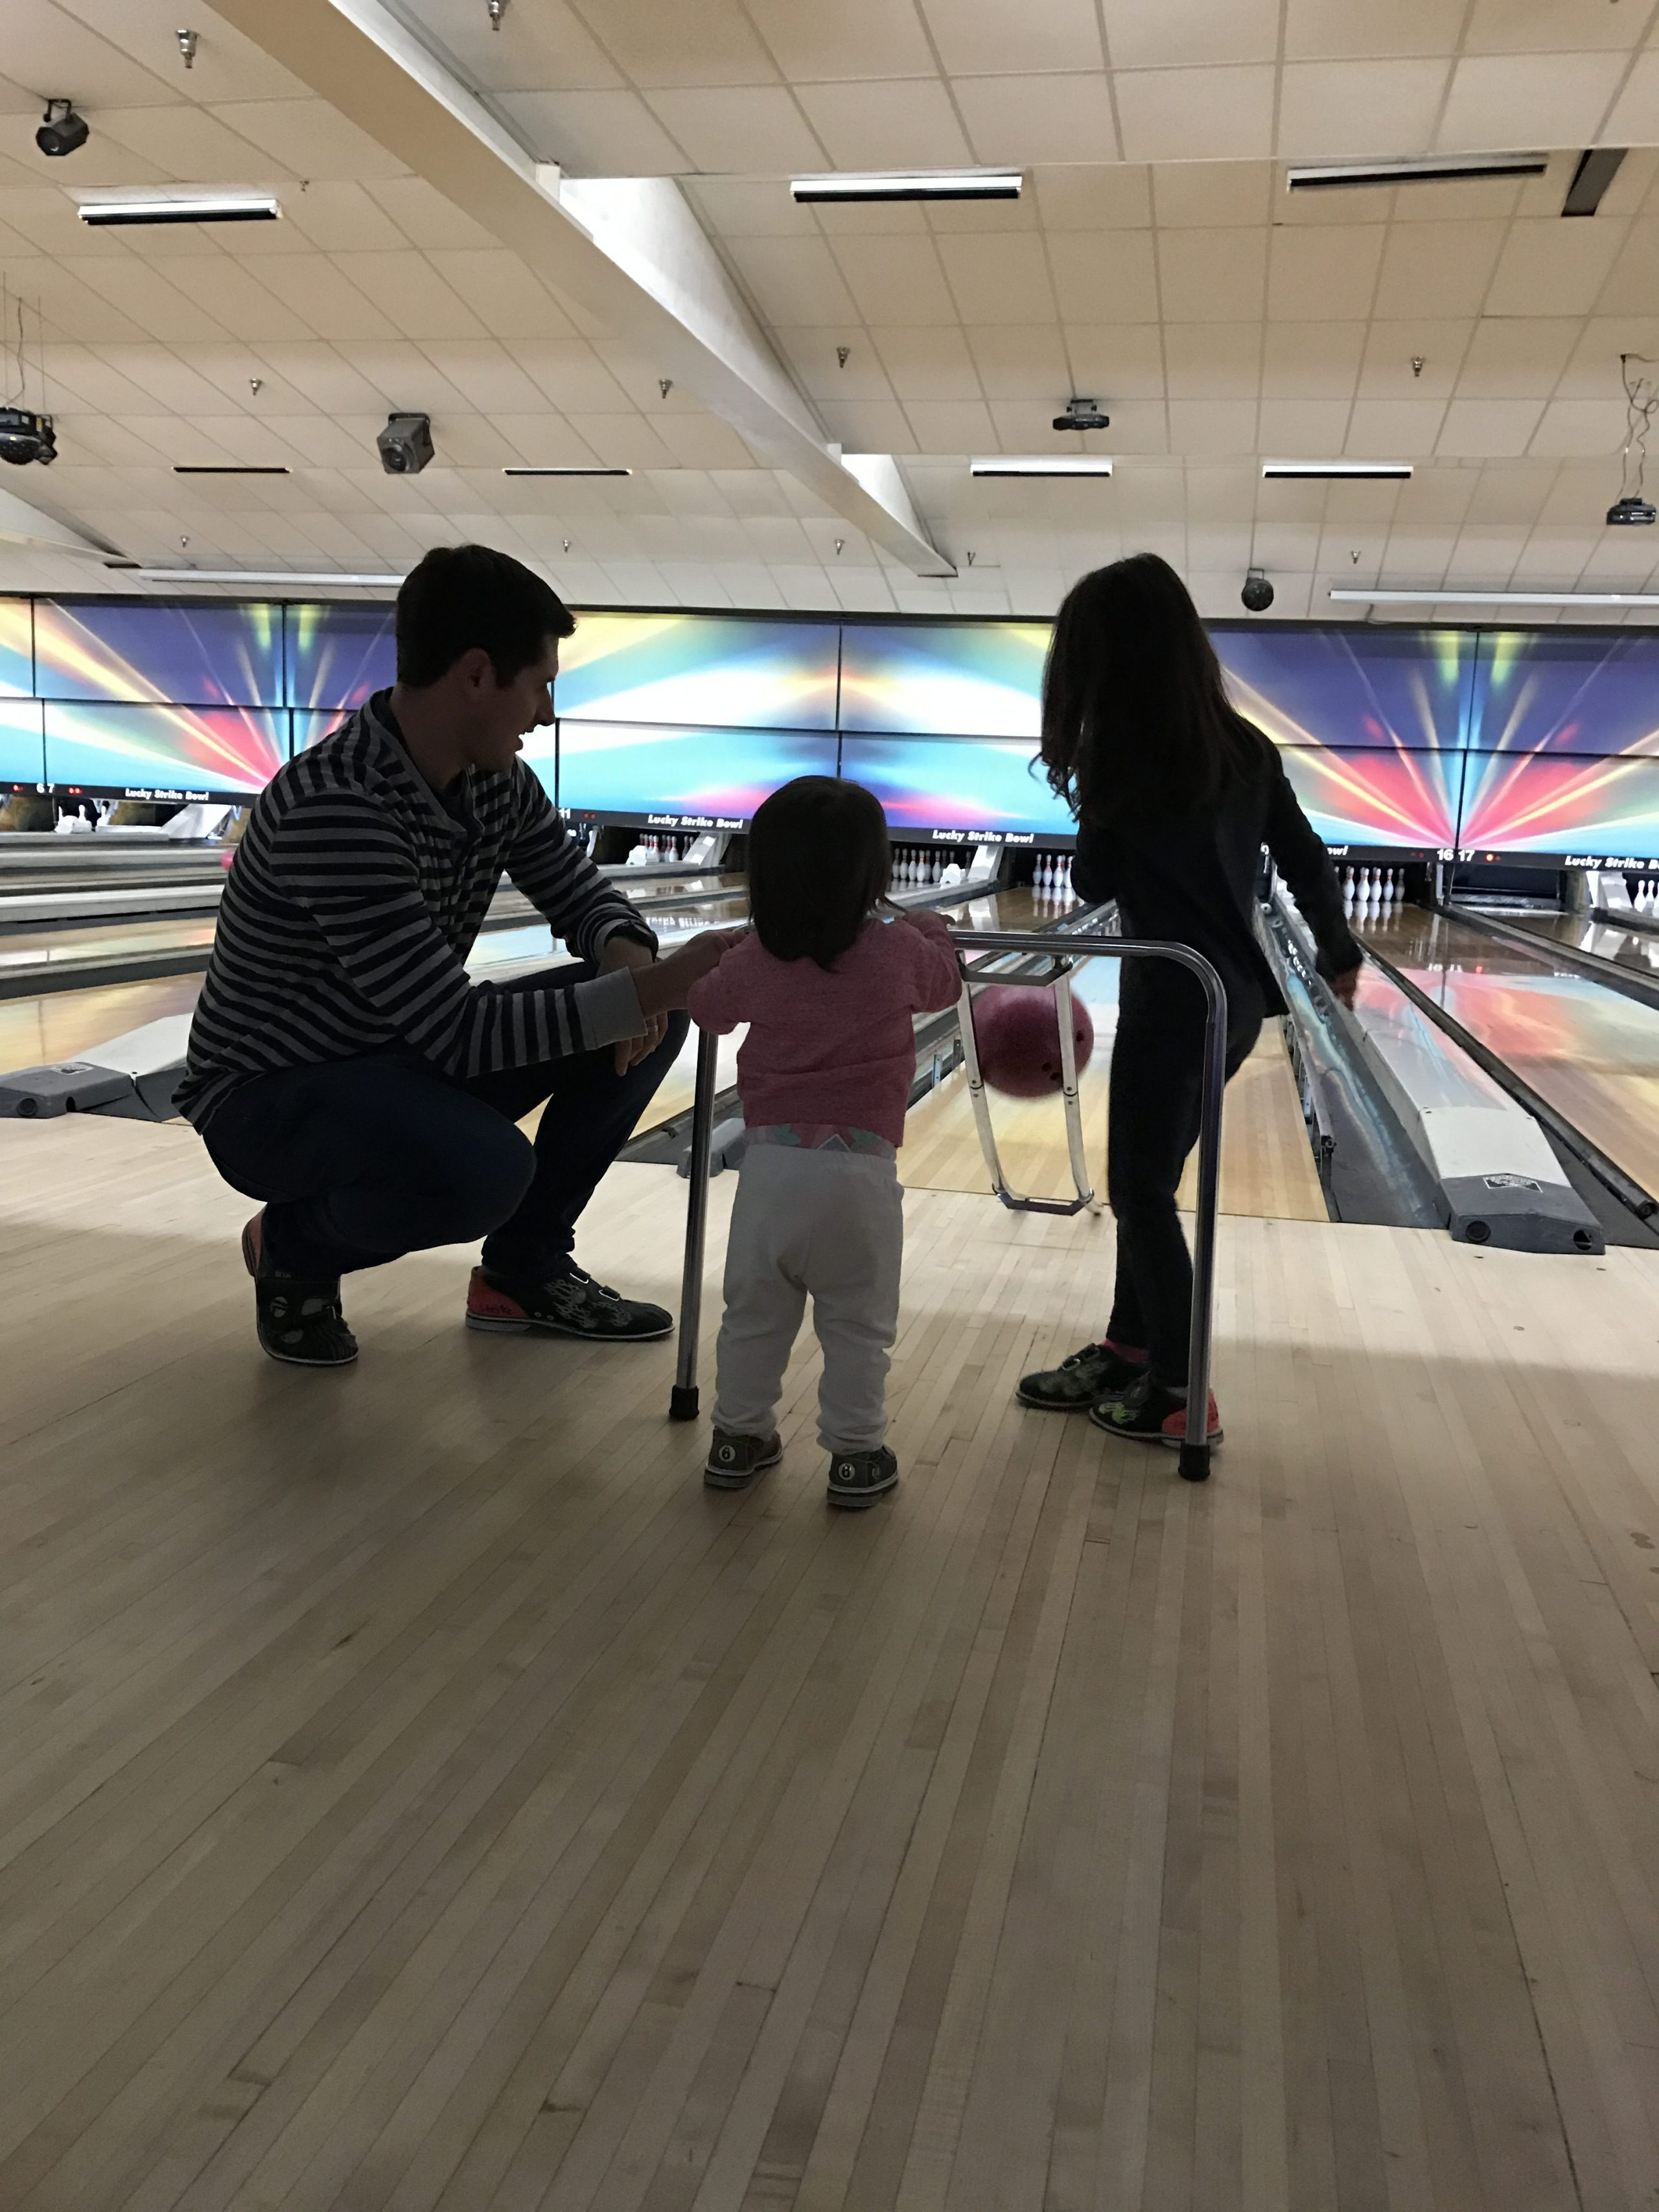 Tom bowling with the girls